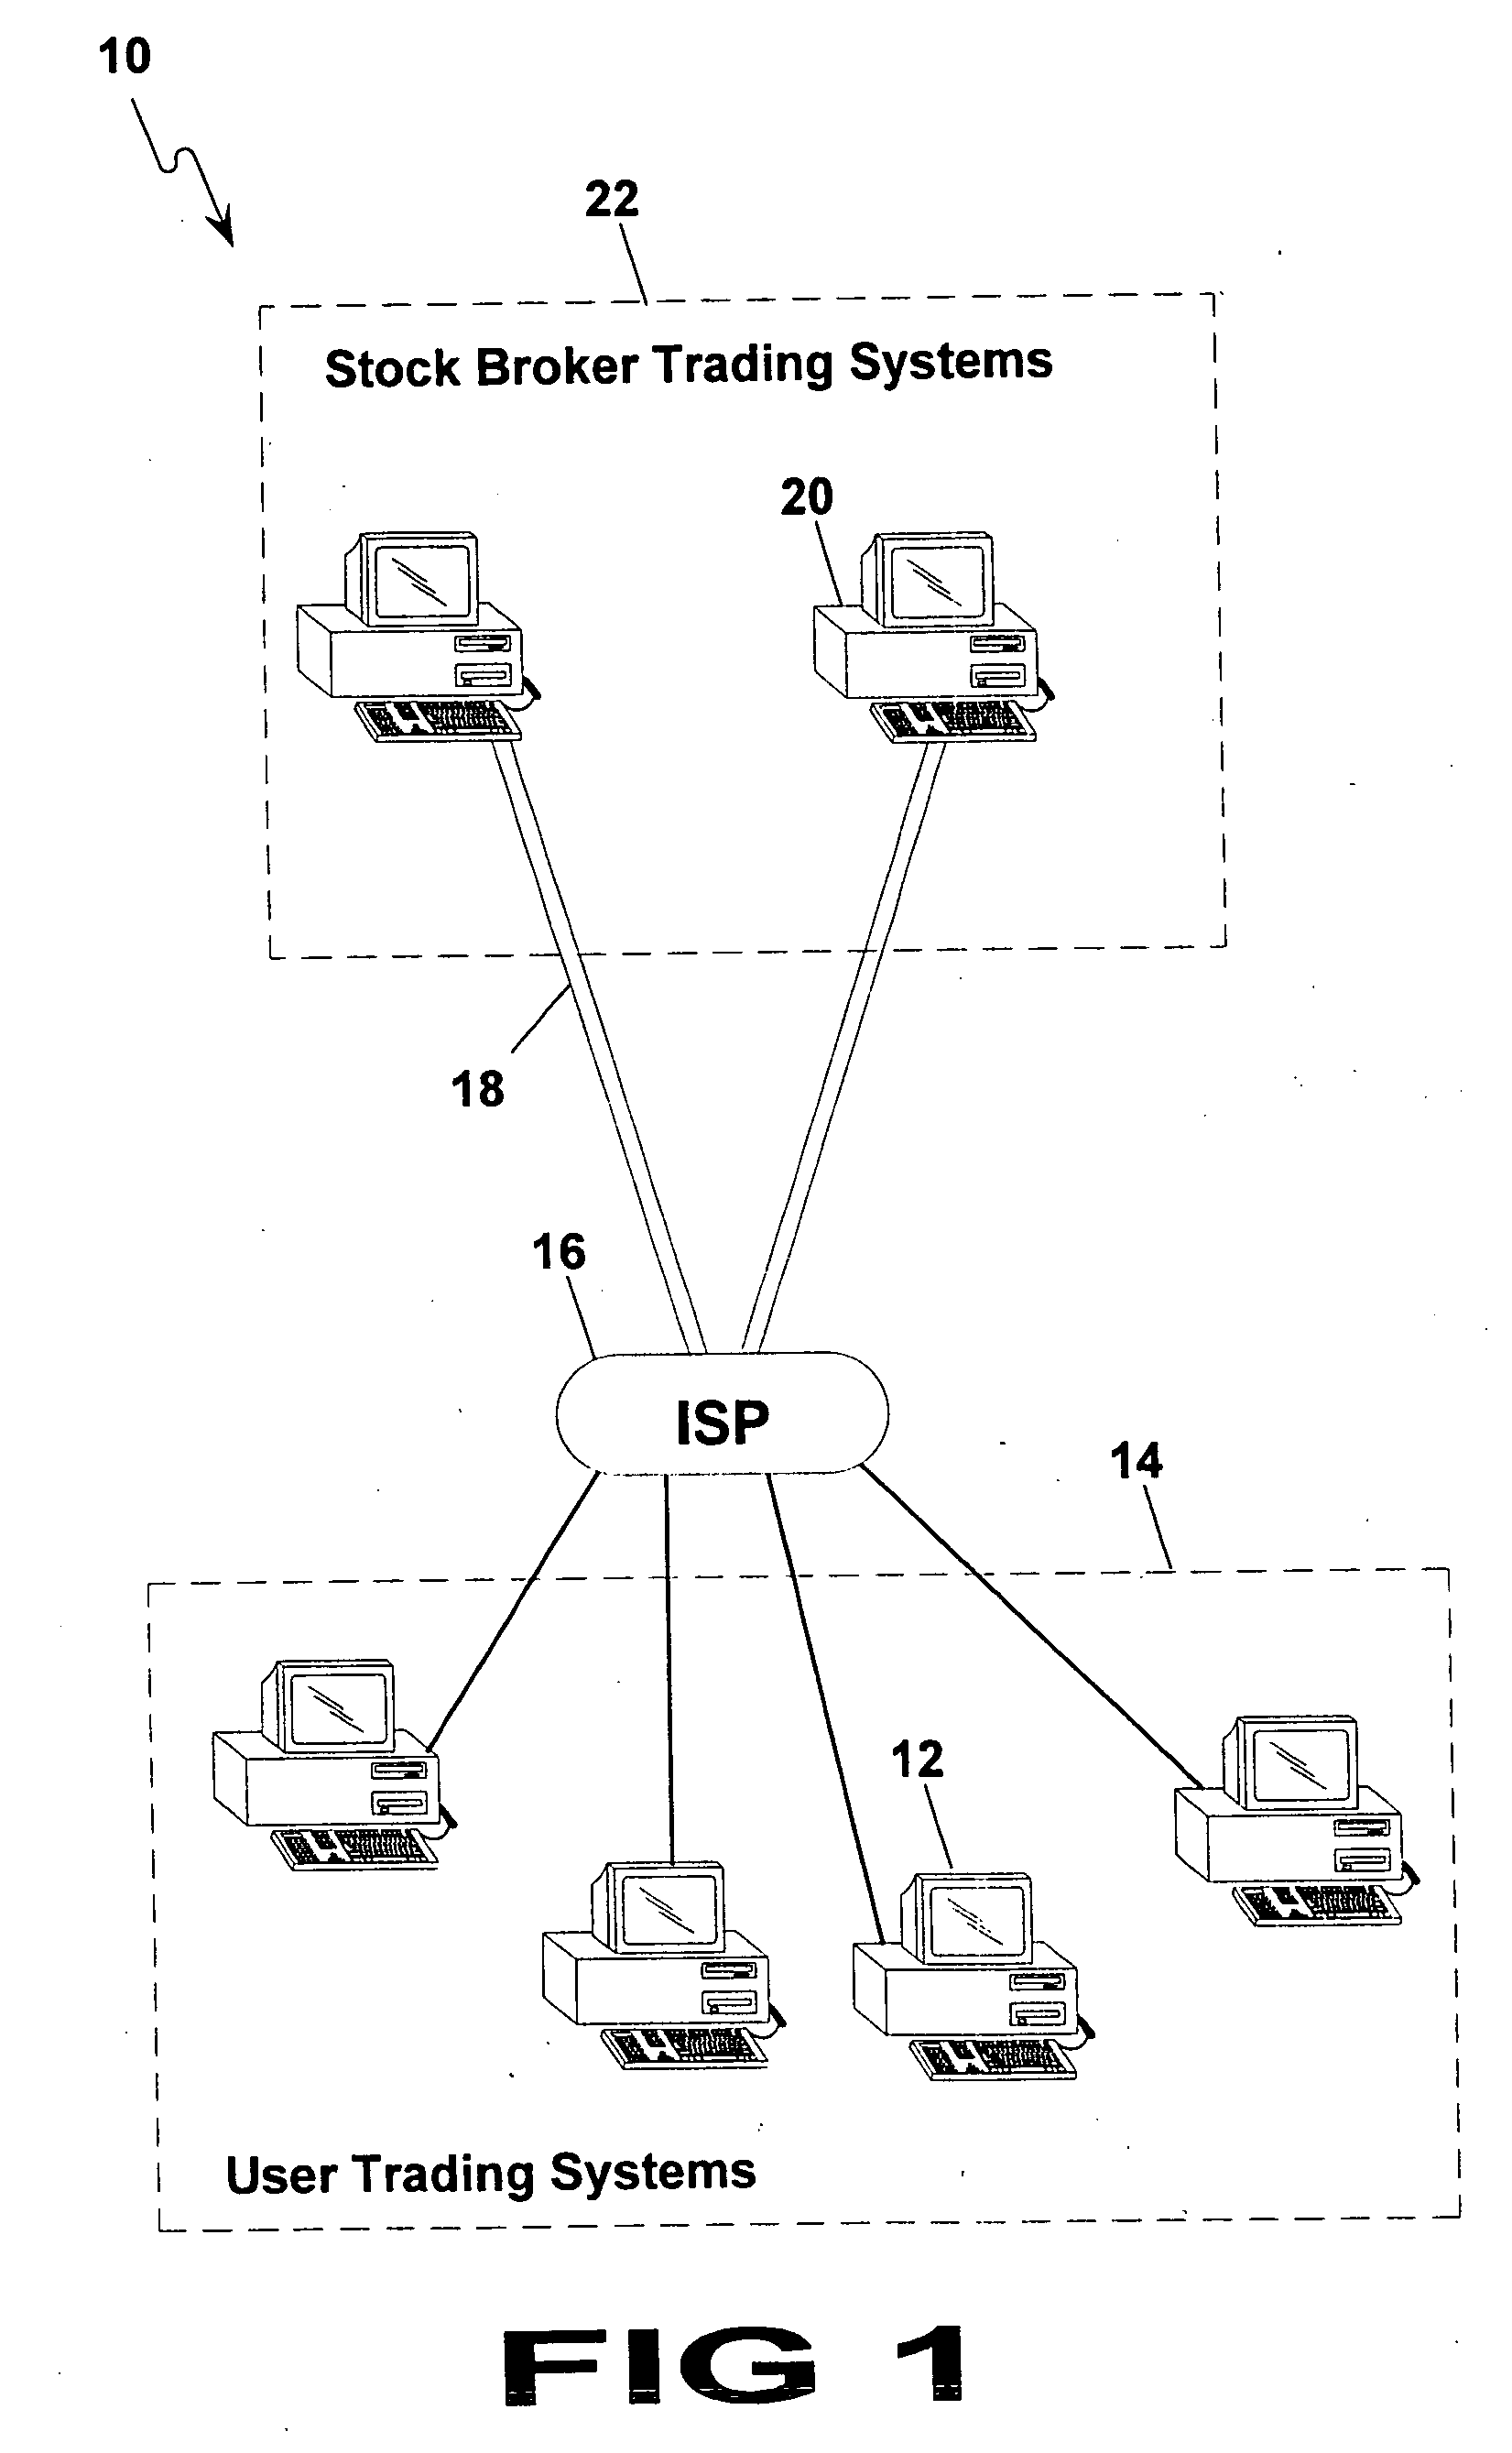 Hypertext transfer protocol application programming interface between cleint-side trading systems and server-side stock trading systems